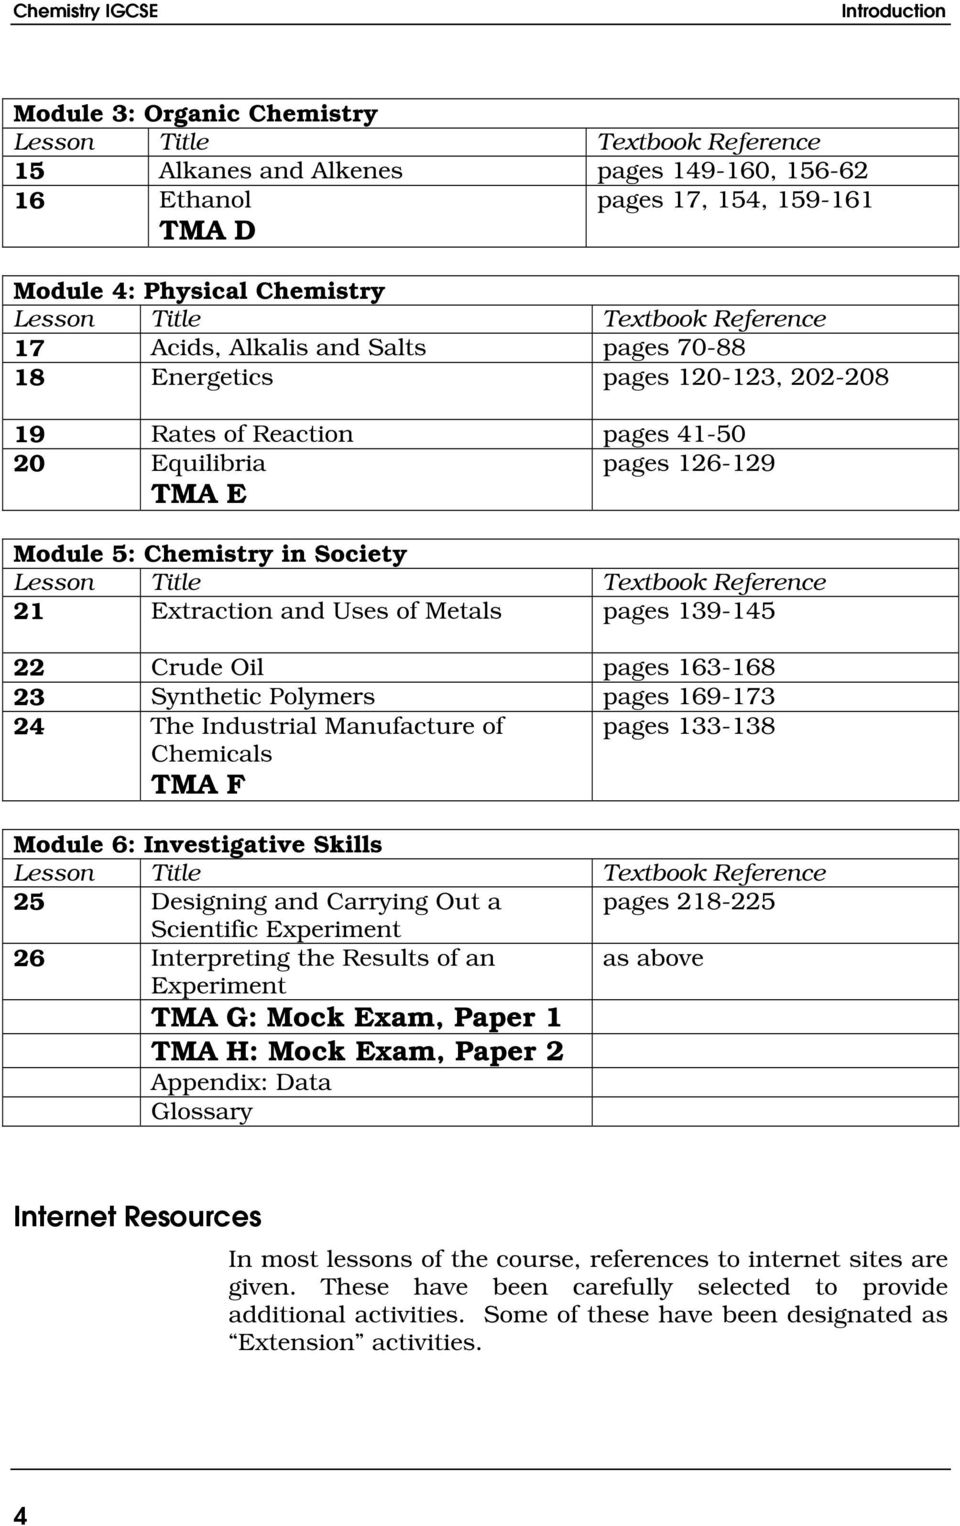 Synthetic Polymers pages 169-173 24 The Industrial Manufacture of Chemicals TMA F pages 133-138 Module 6: Investigative Skills 25 Designing and Carrying Out a pages 218-225 Scientific Experiment 26